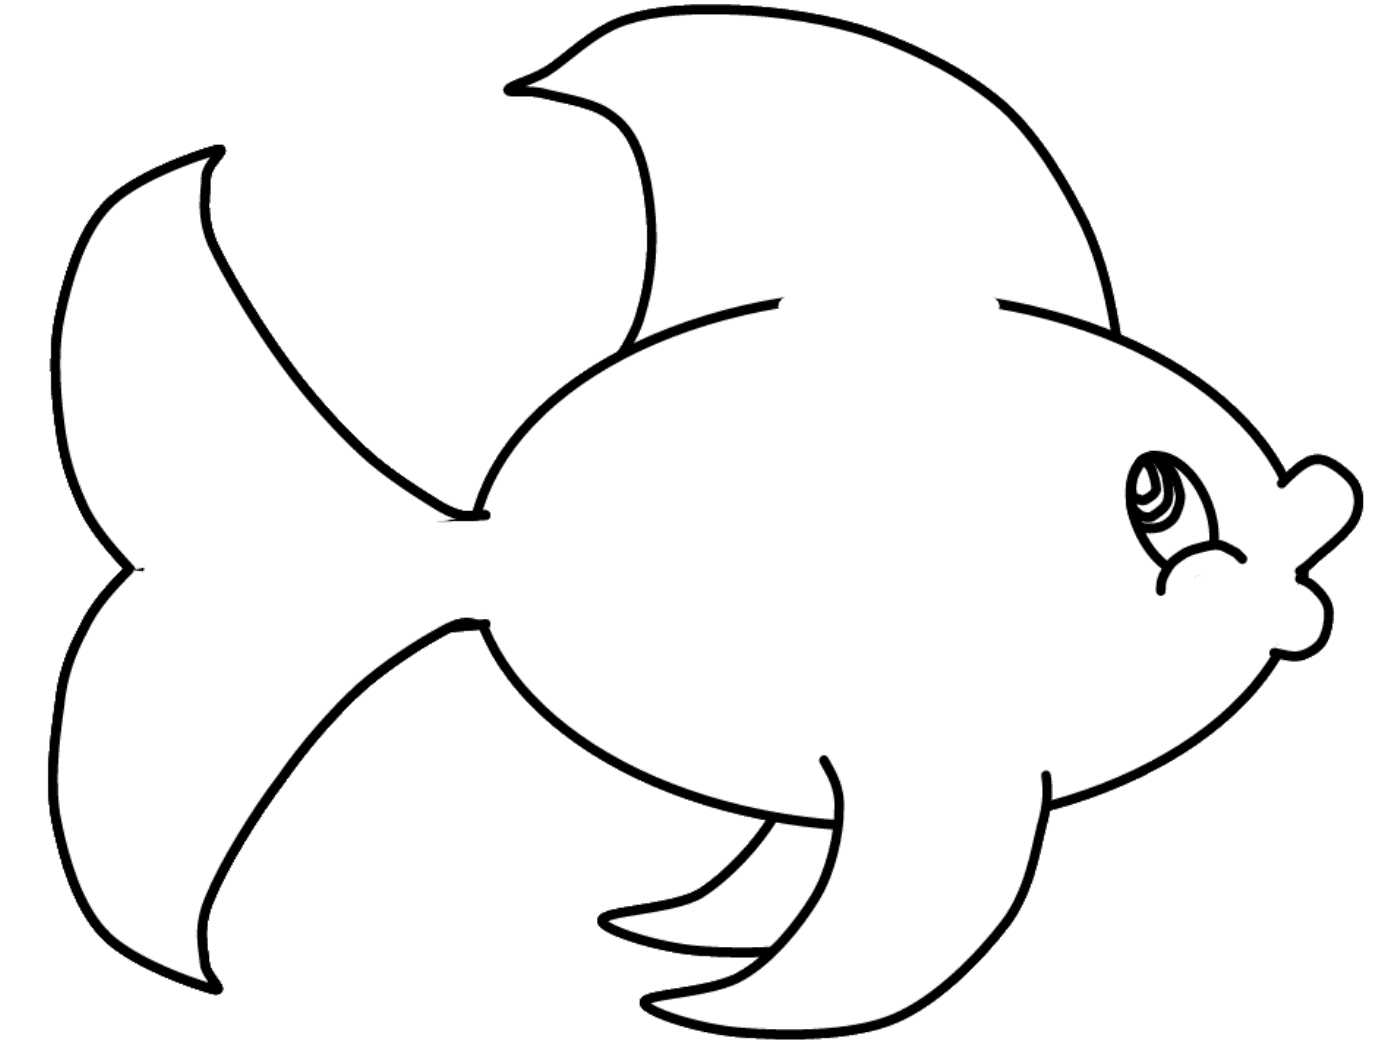 Simple Fish Coloring Page - Coloring Home